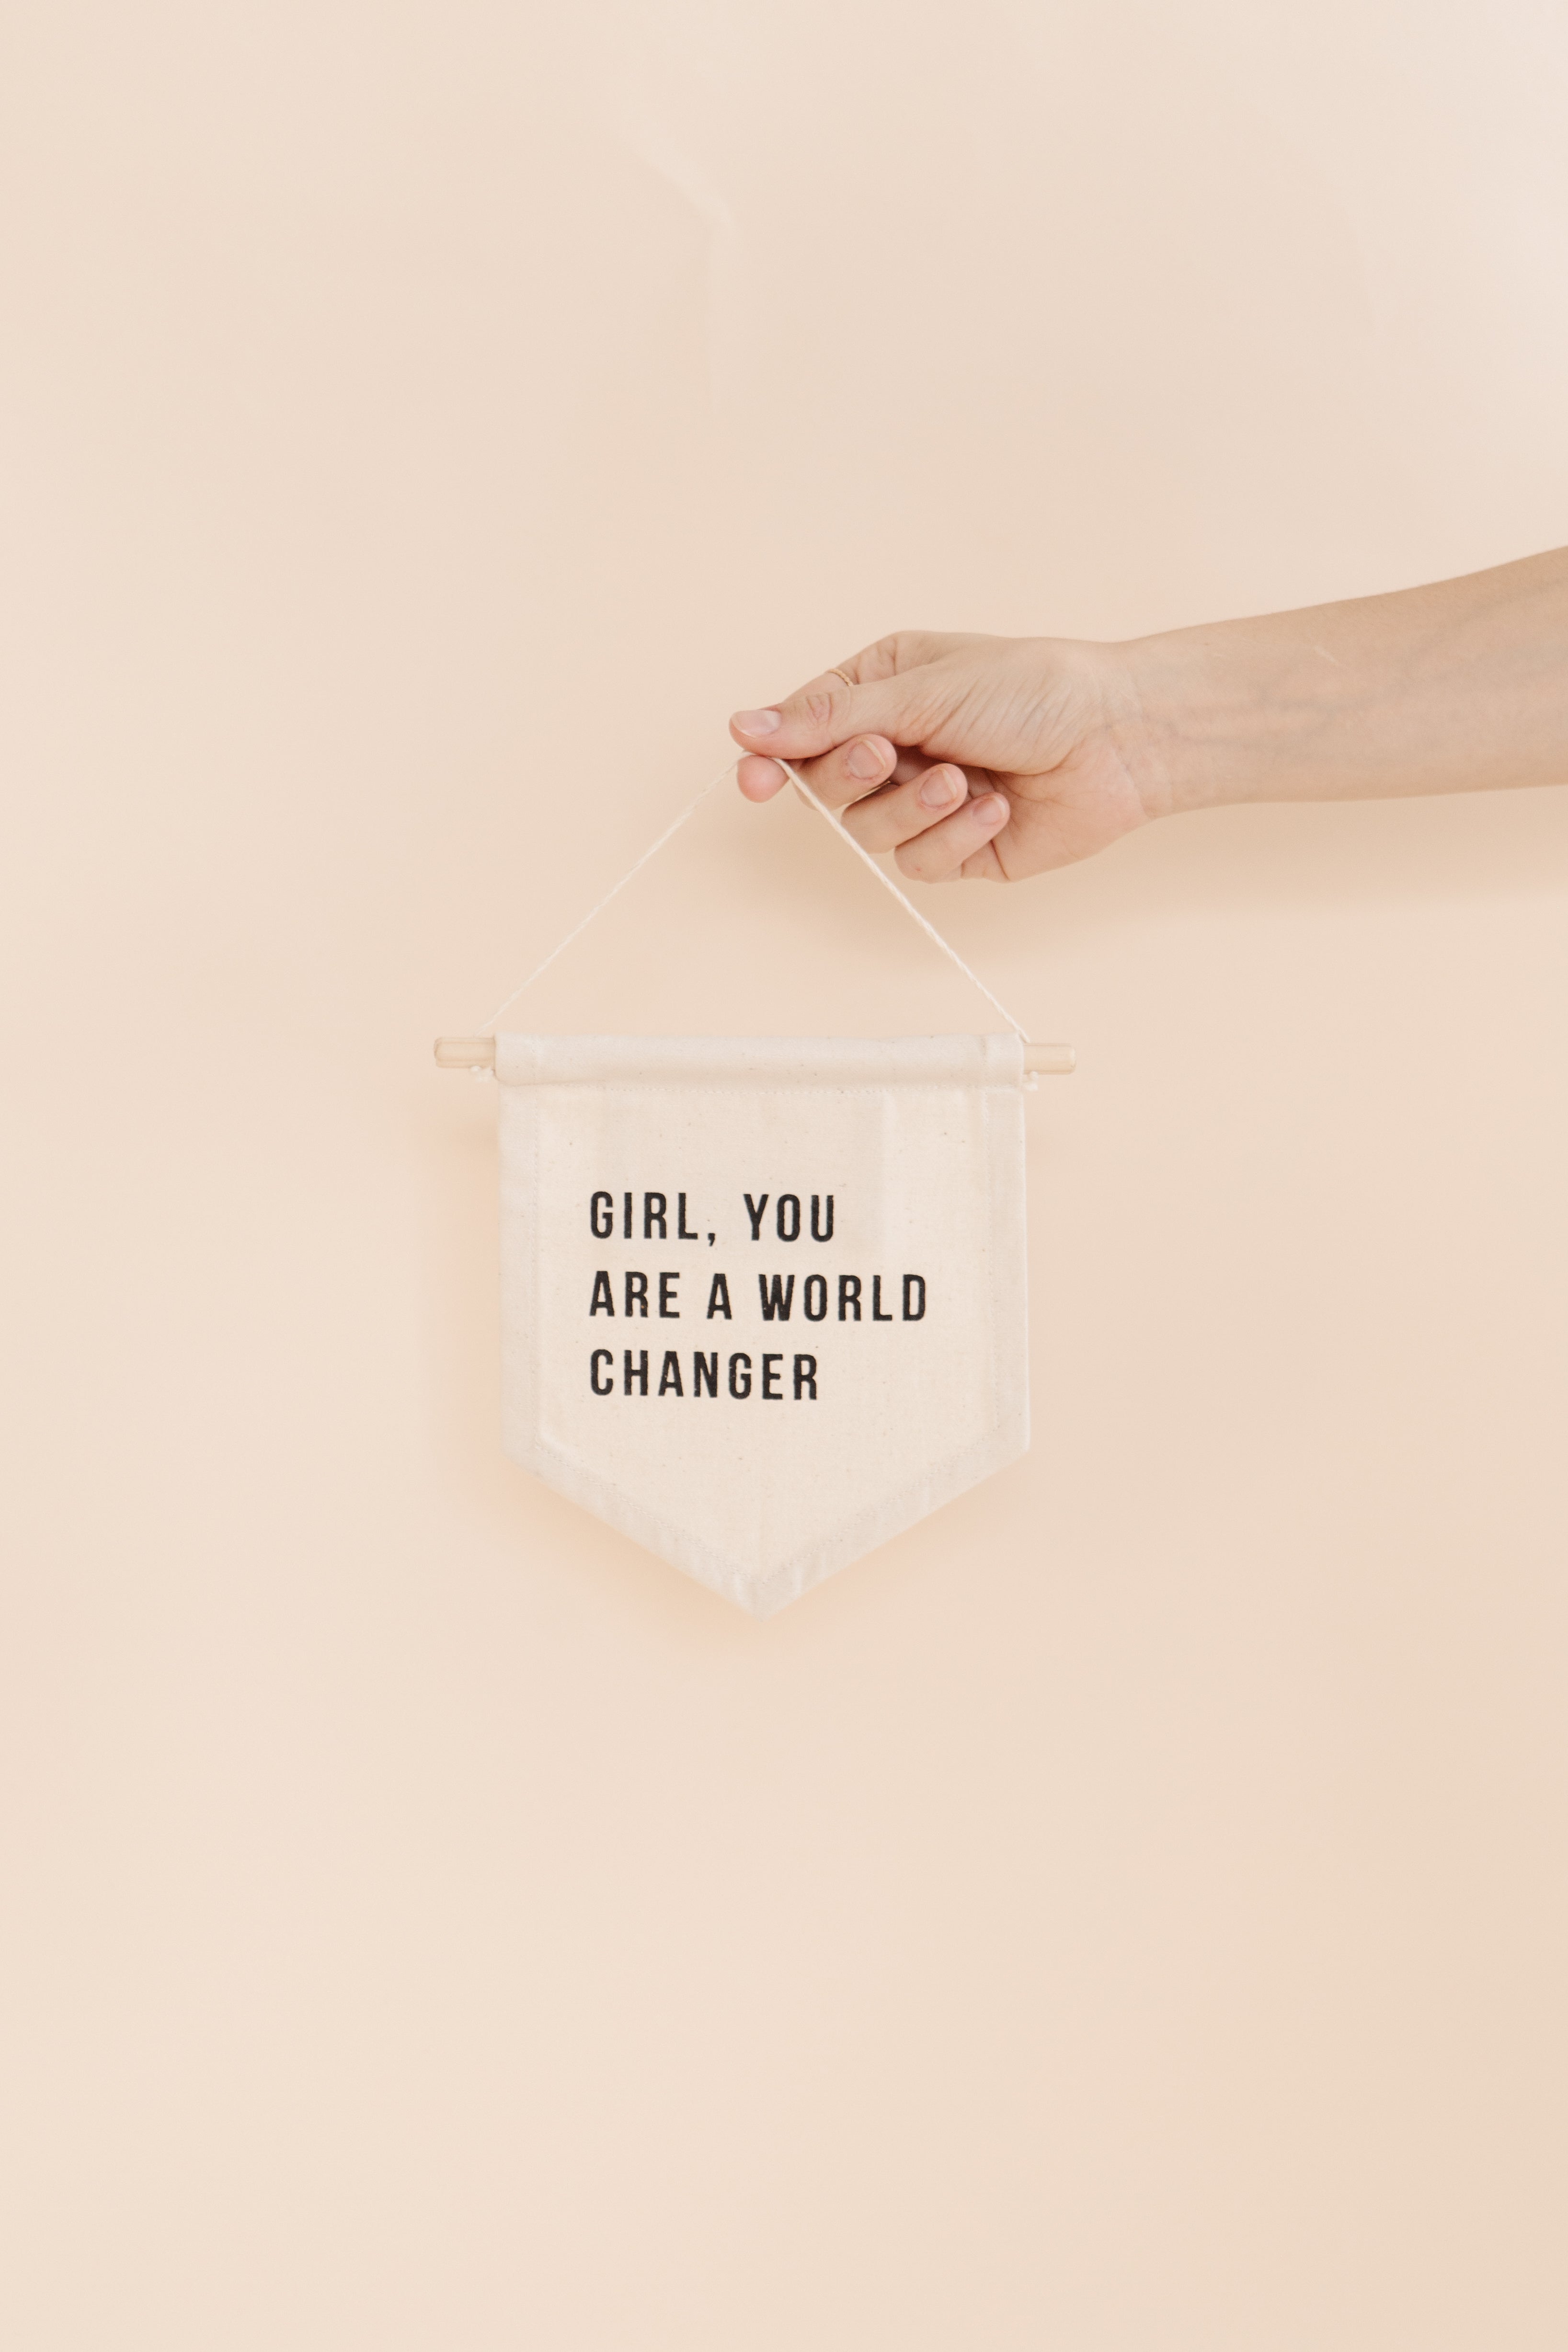 Girl, you are a world changer